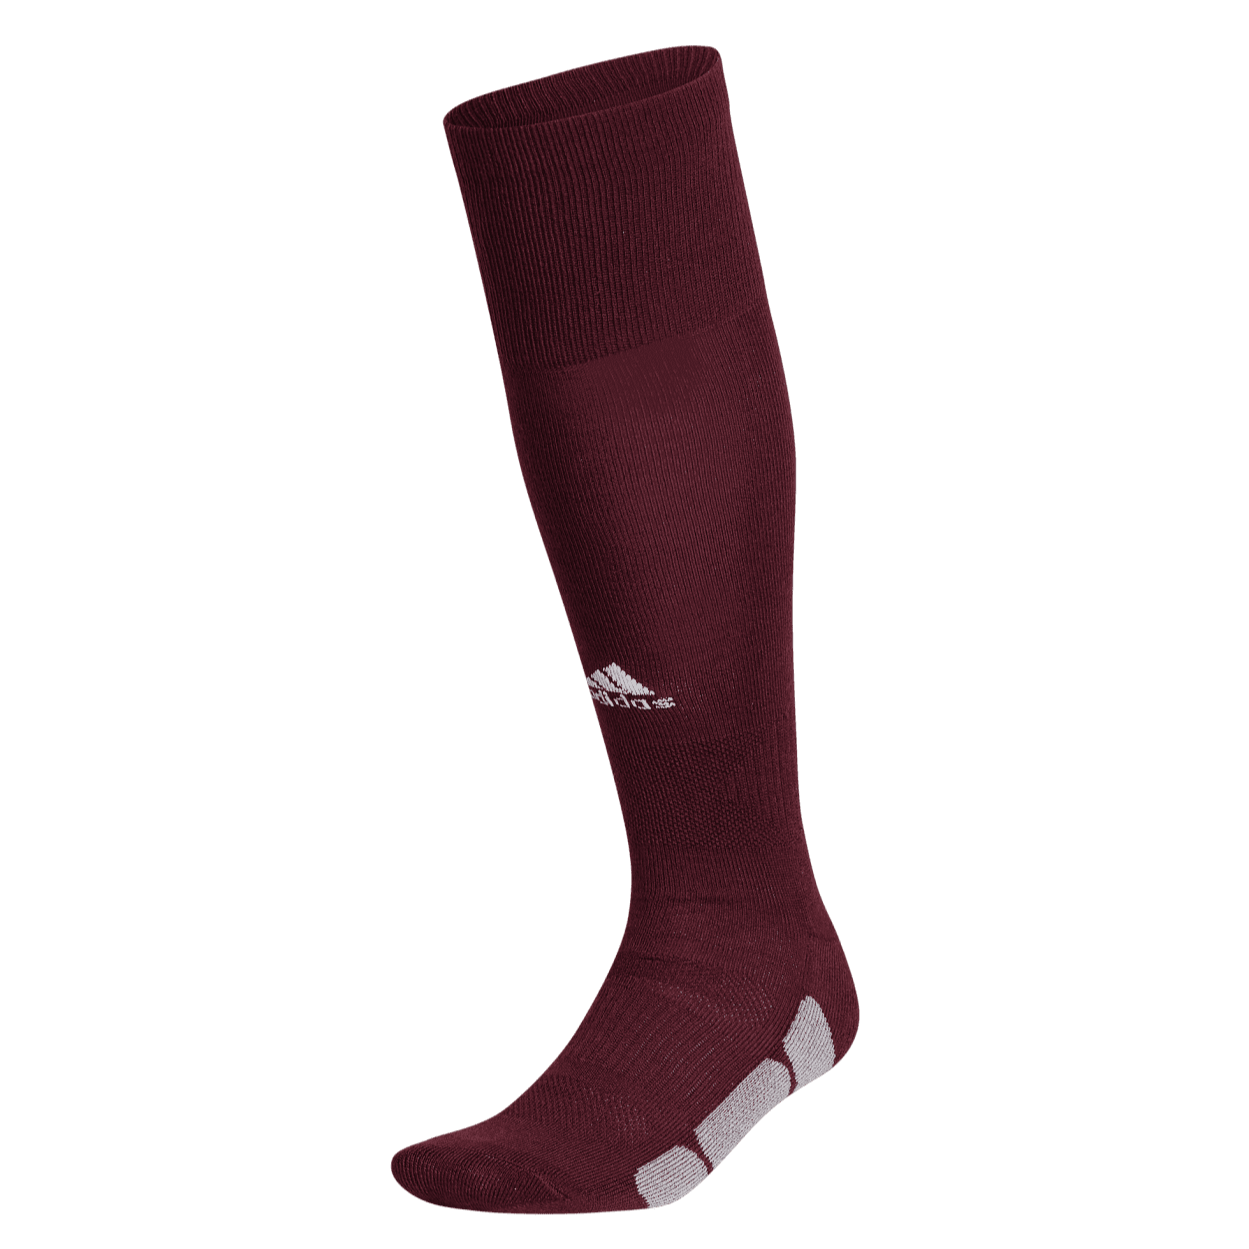 adidas Utility OTC All Sport Socks Maroon-White (Lateral - Front)